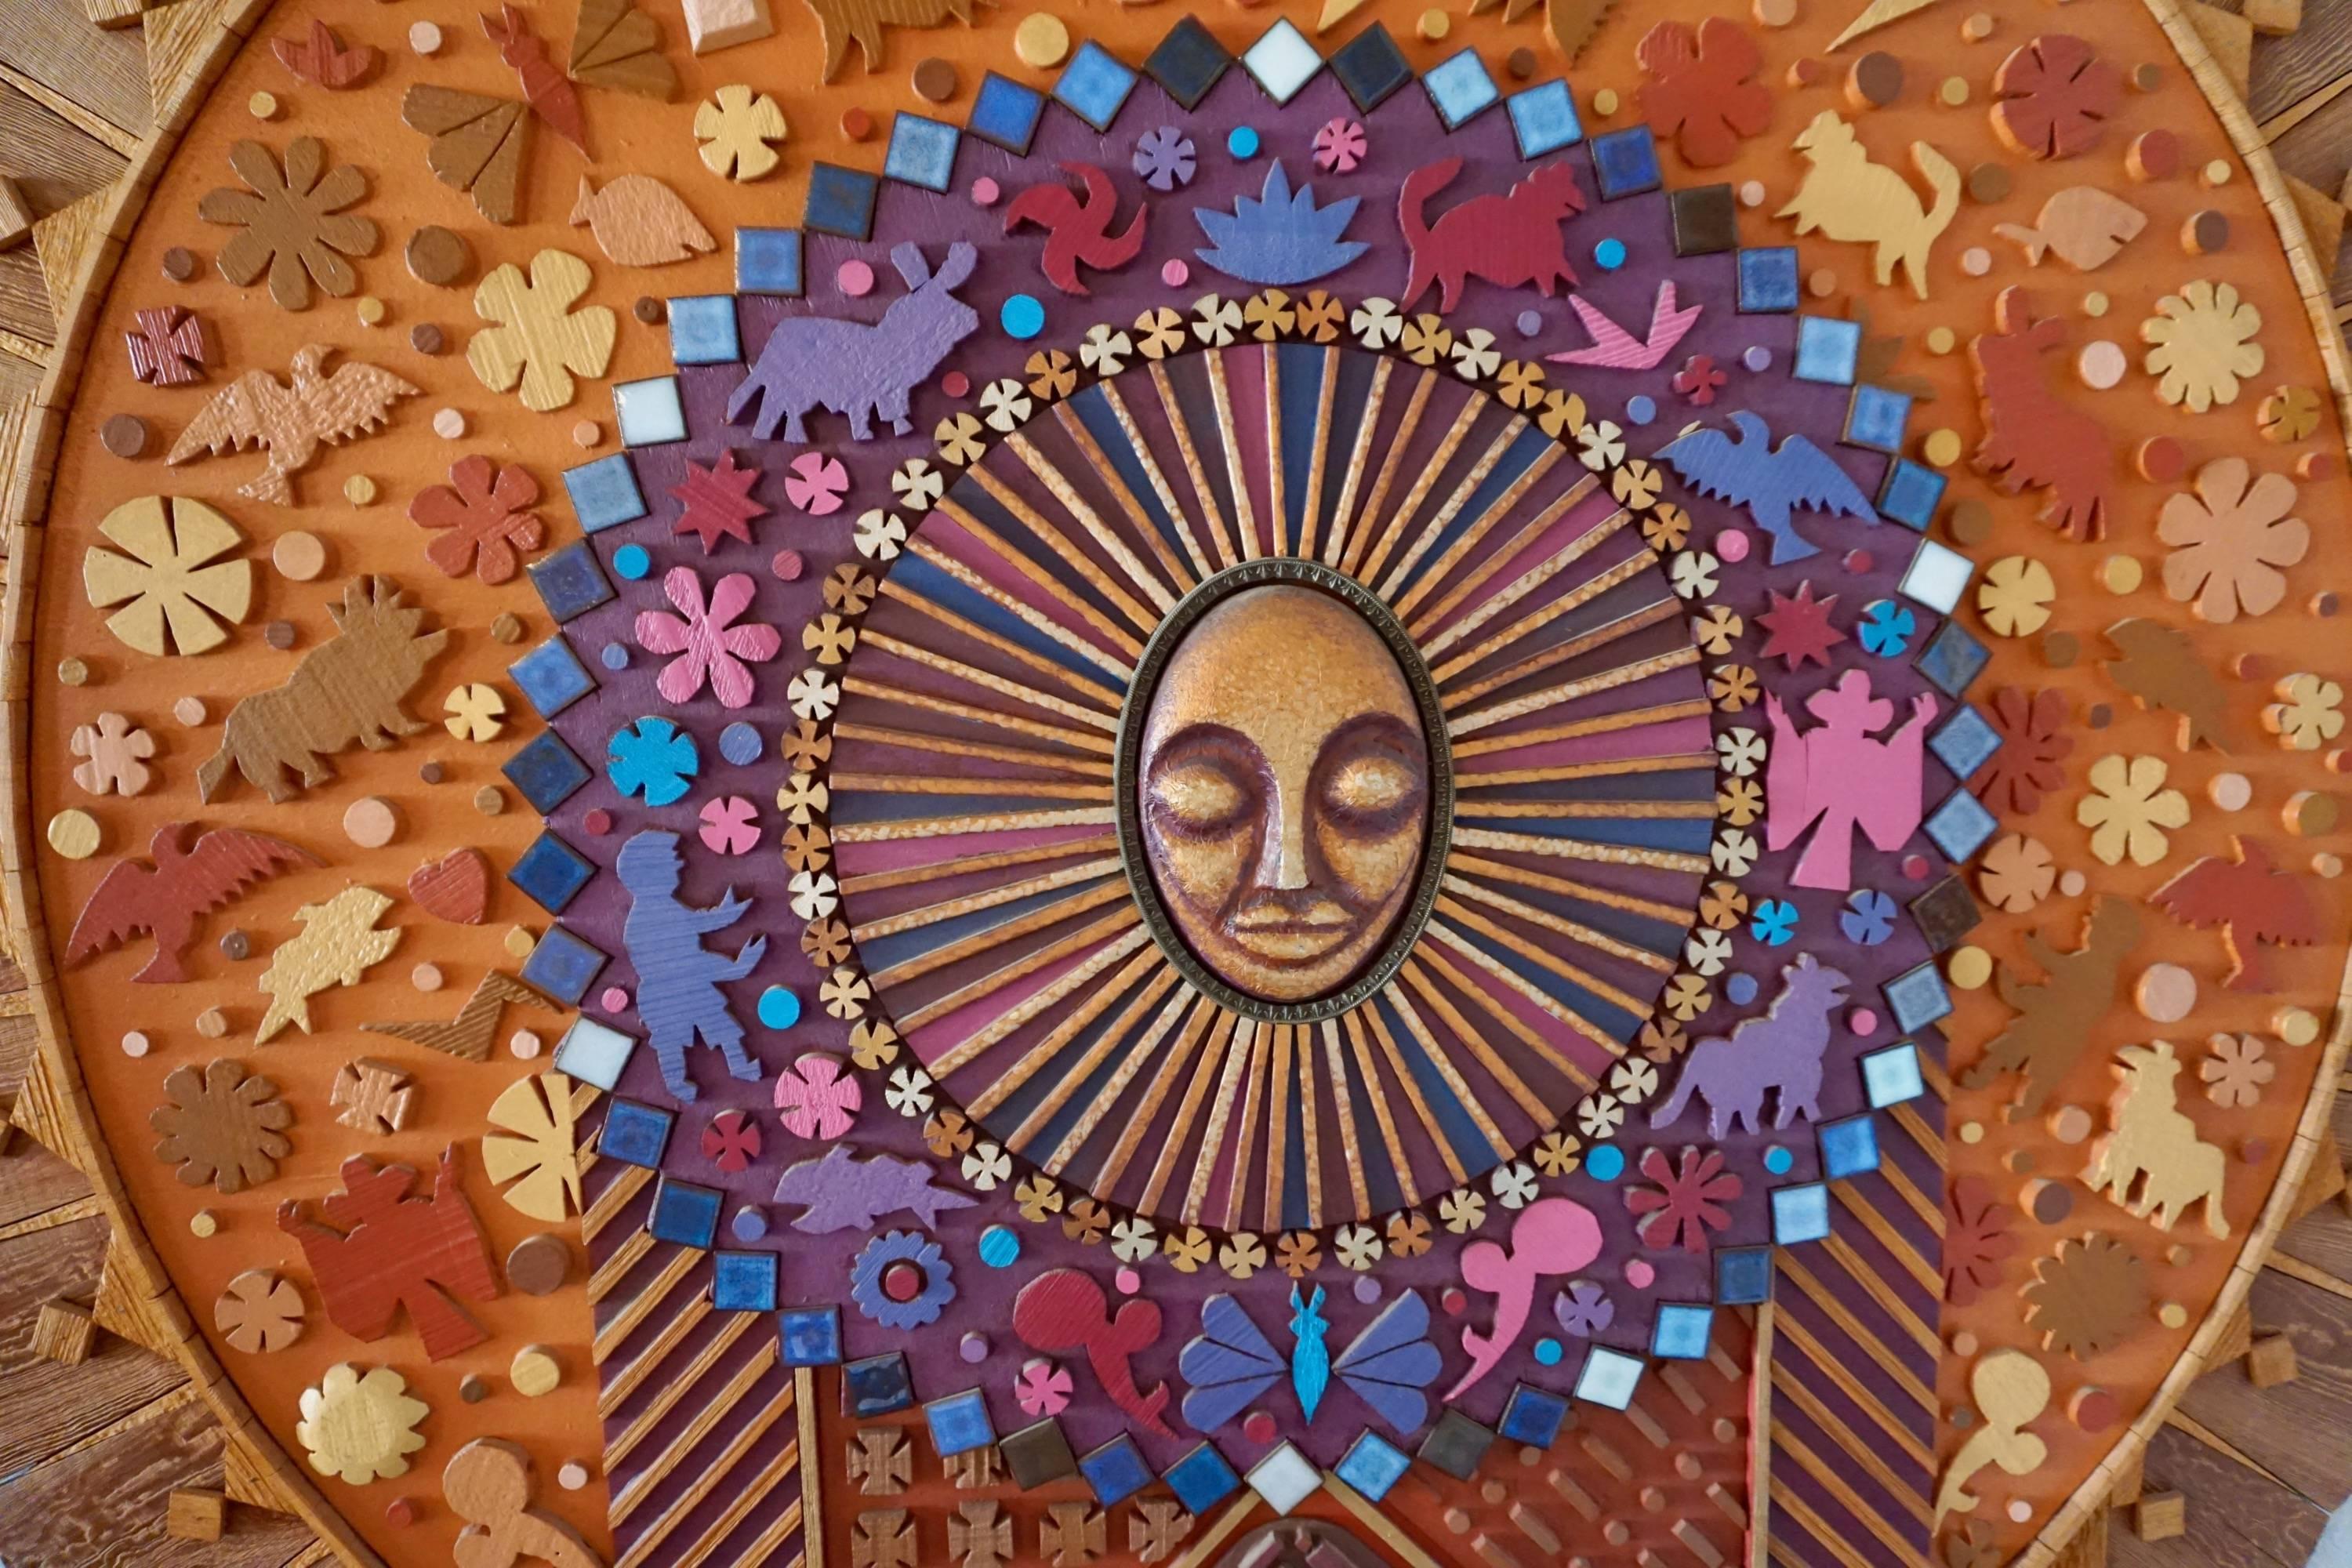 Large 1970s wood construction by San Diego artist, Dennis Davis. Sunburst centre radiating with wood cut-outs of flowers, animals and ceramic tiles.